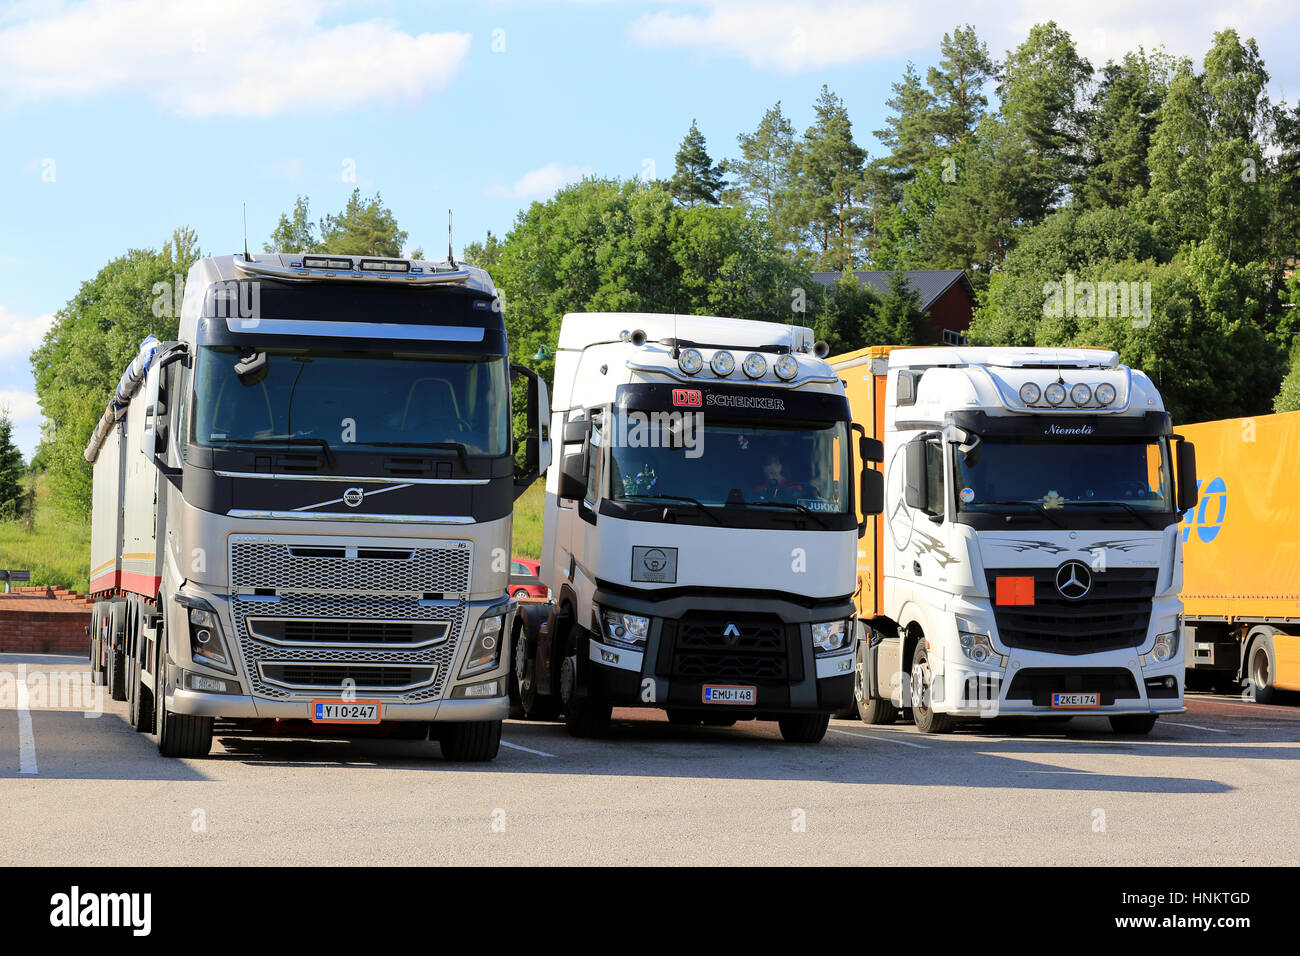 SALO, FINLAND - JULY 1, 2016: Modern Volvo FH, Renault Trucks T and Mercedes-Benz Actros heavy goods vehicles parked at a truck stop yard on beautiful Stock Photo